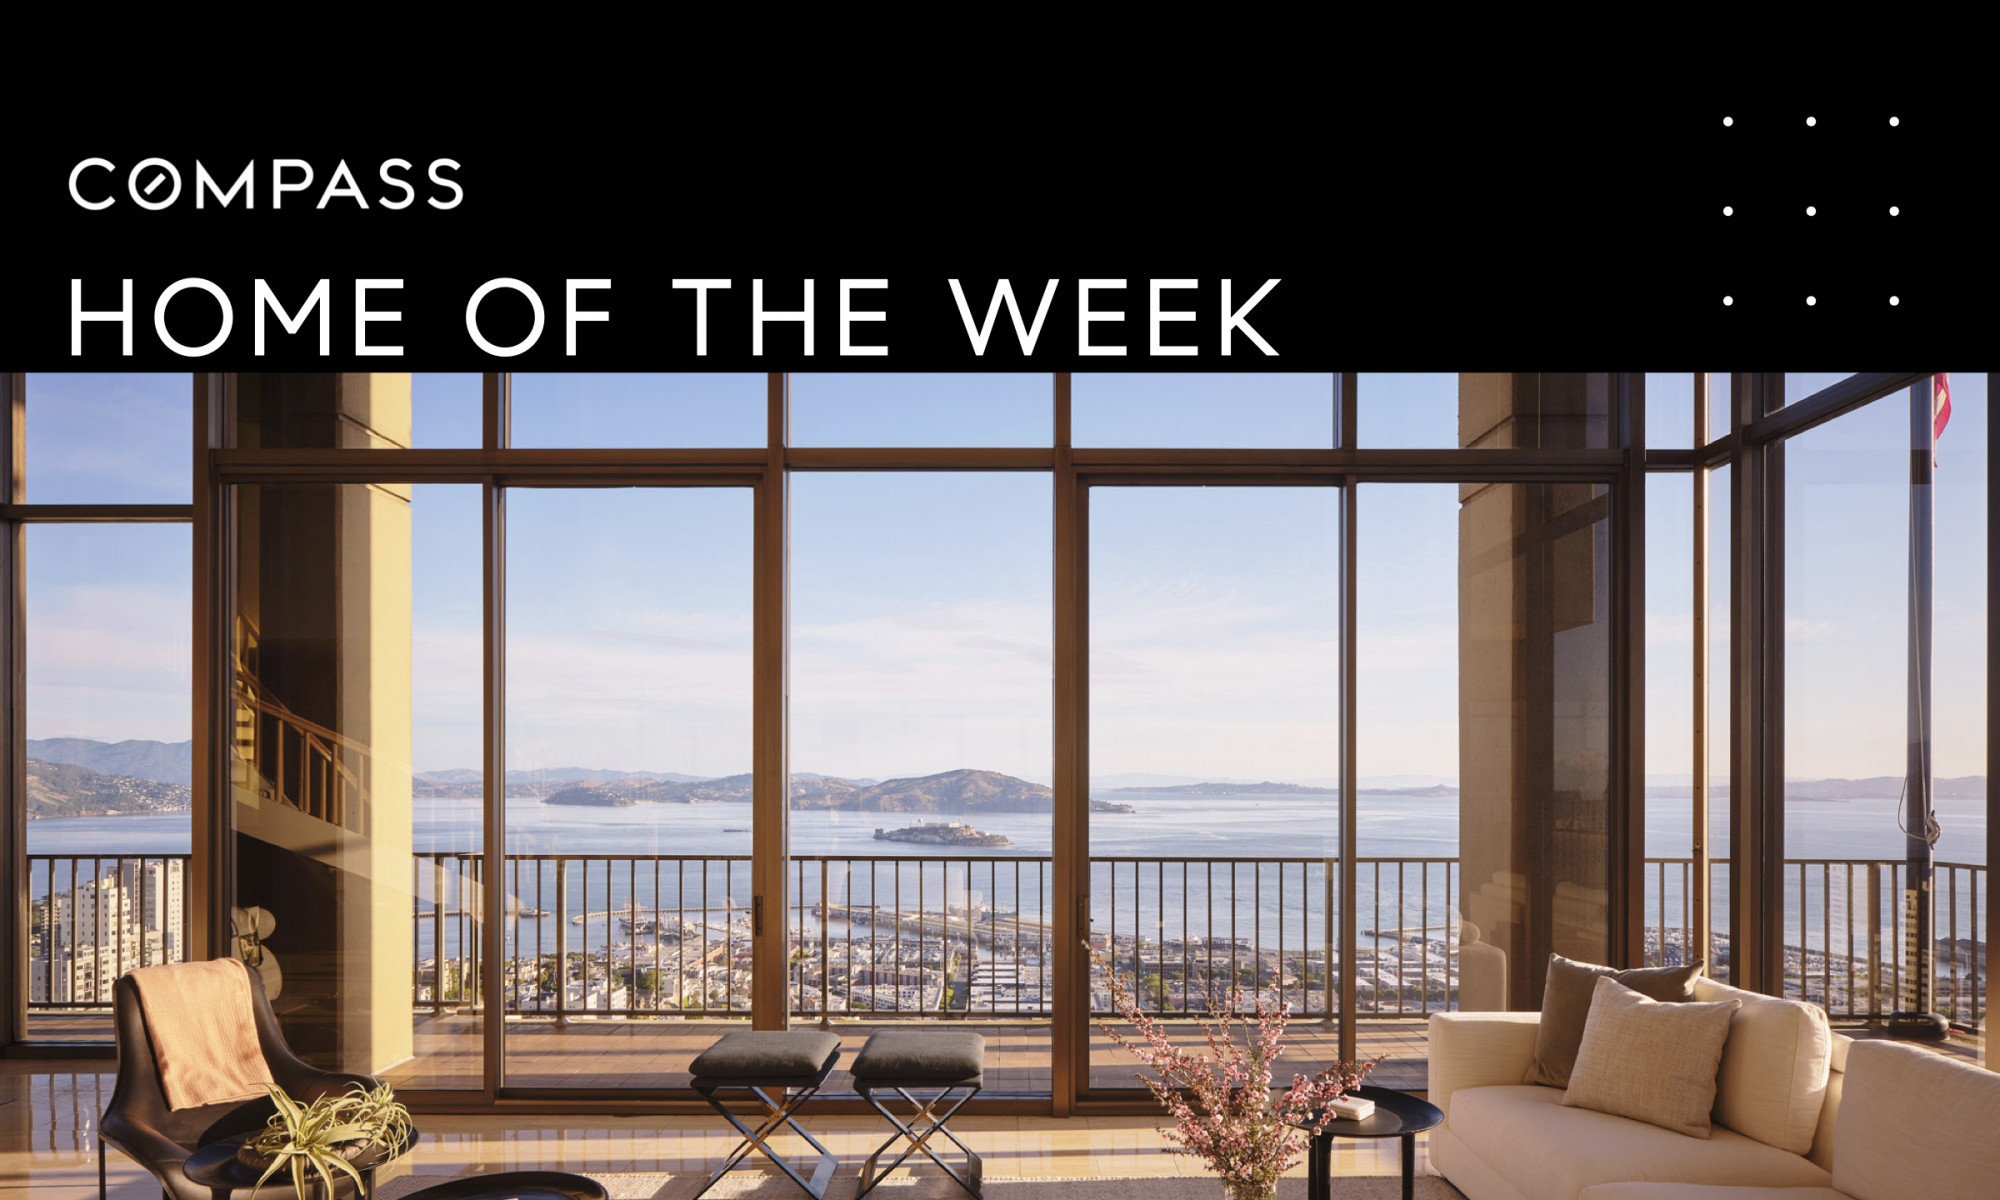 999 Green St Home of the week banner with image of living area and plate glass window walls SF skyline view